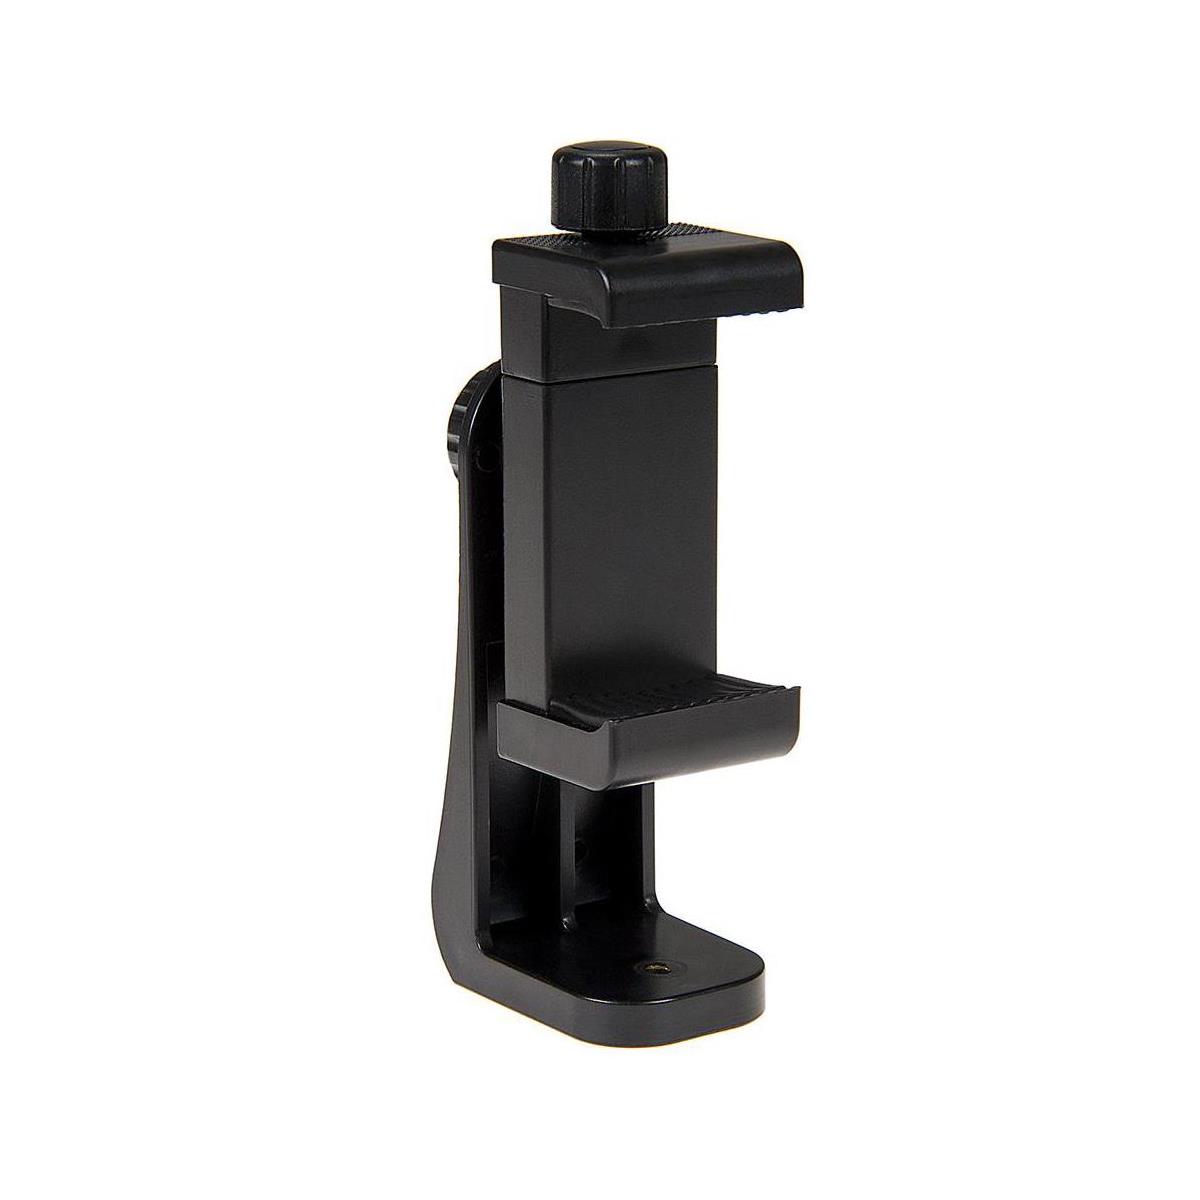 

Fotodiox Cell Phone Tripod Mount Adapter for Smartphones